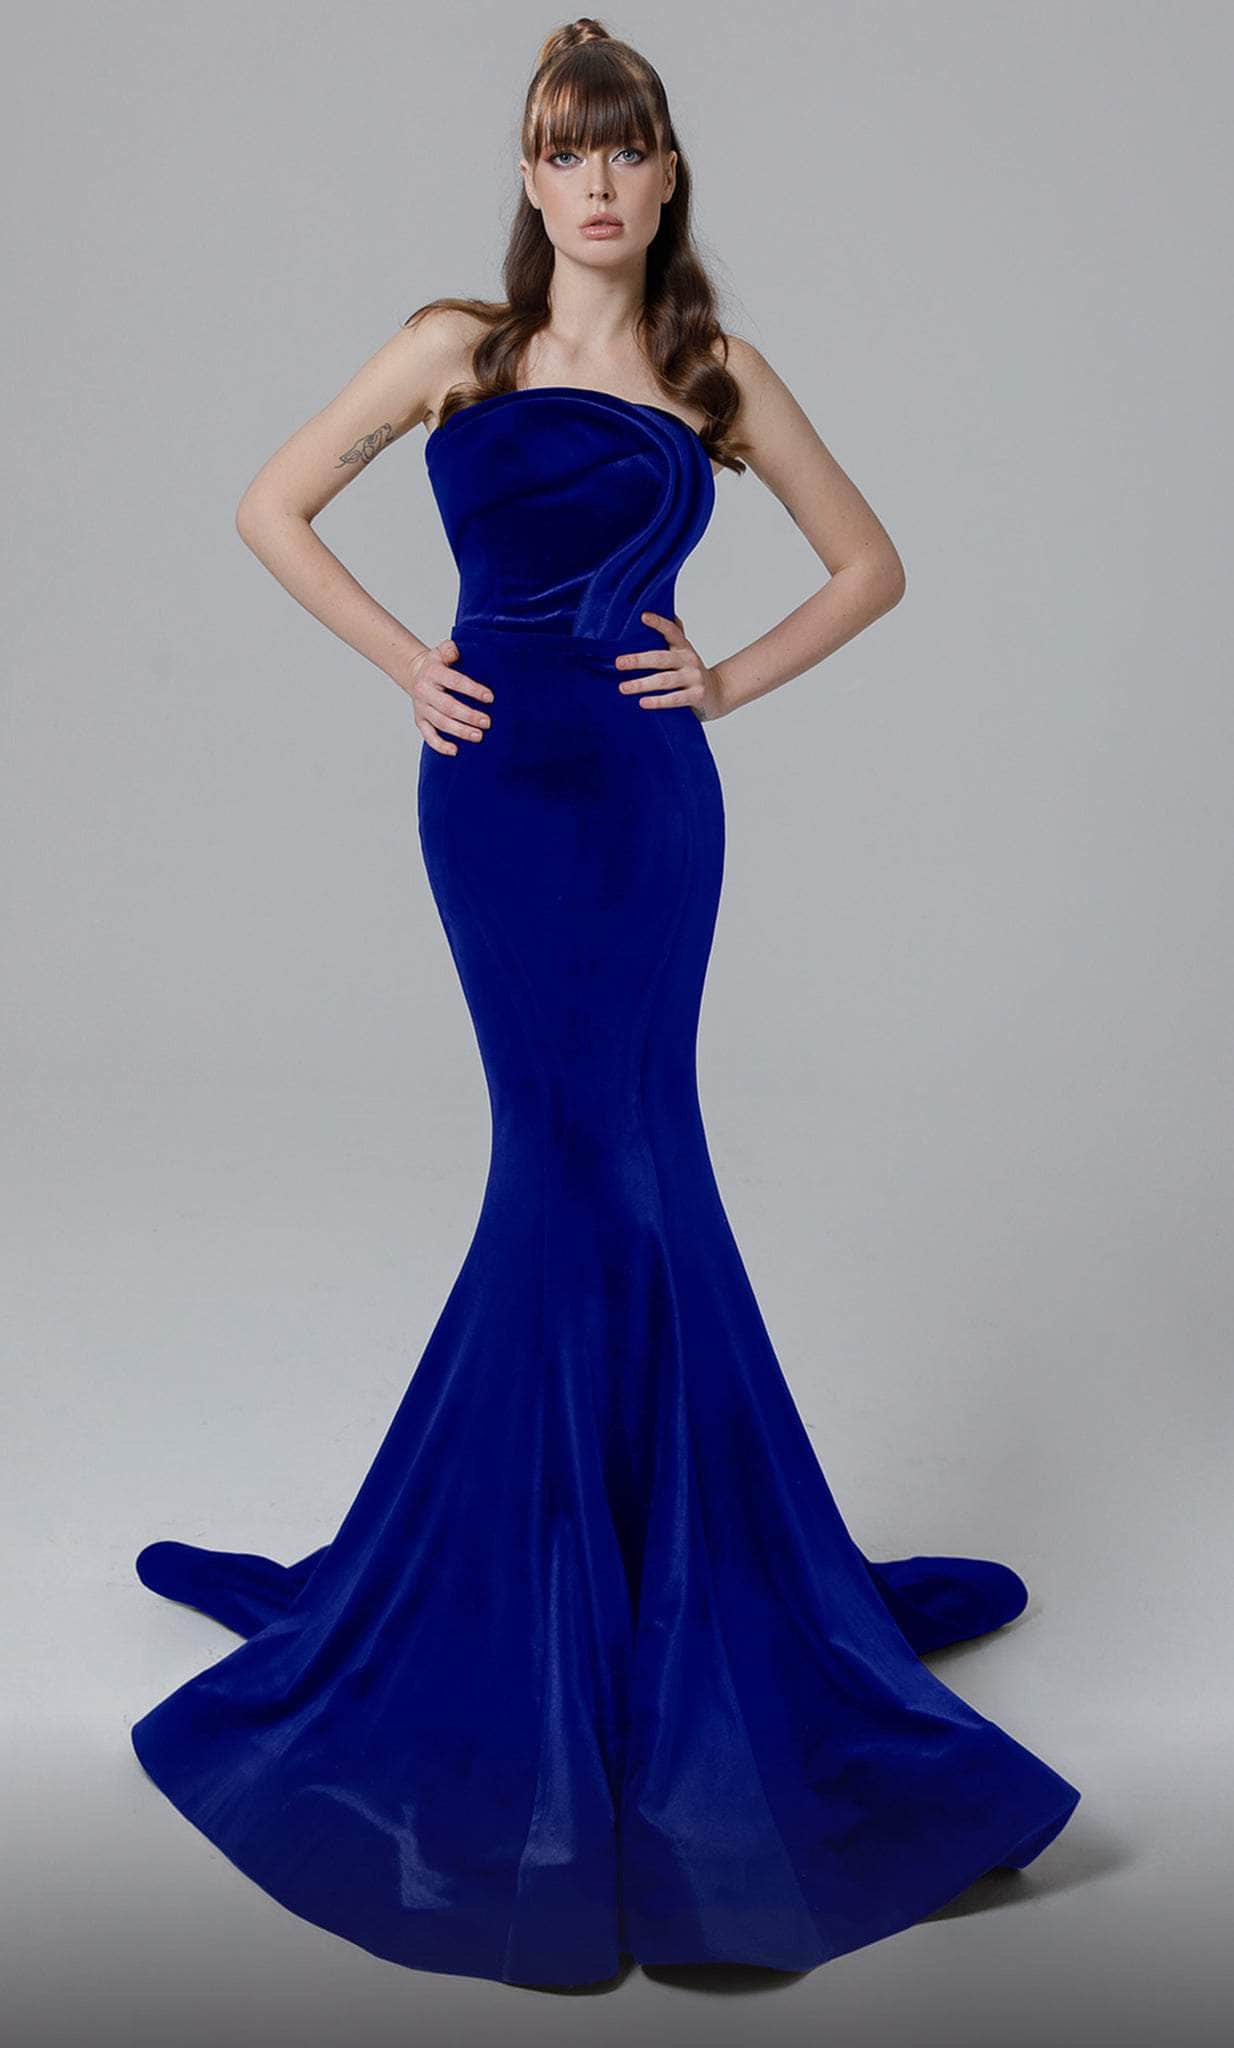 MNM Couture N0450 - Strapless Velvet Evening Gown
